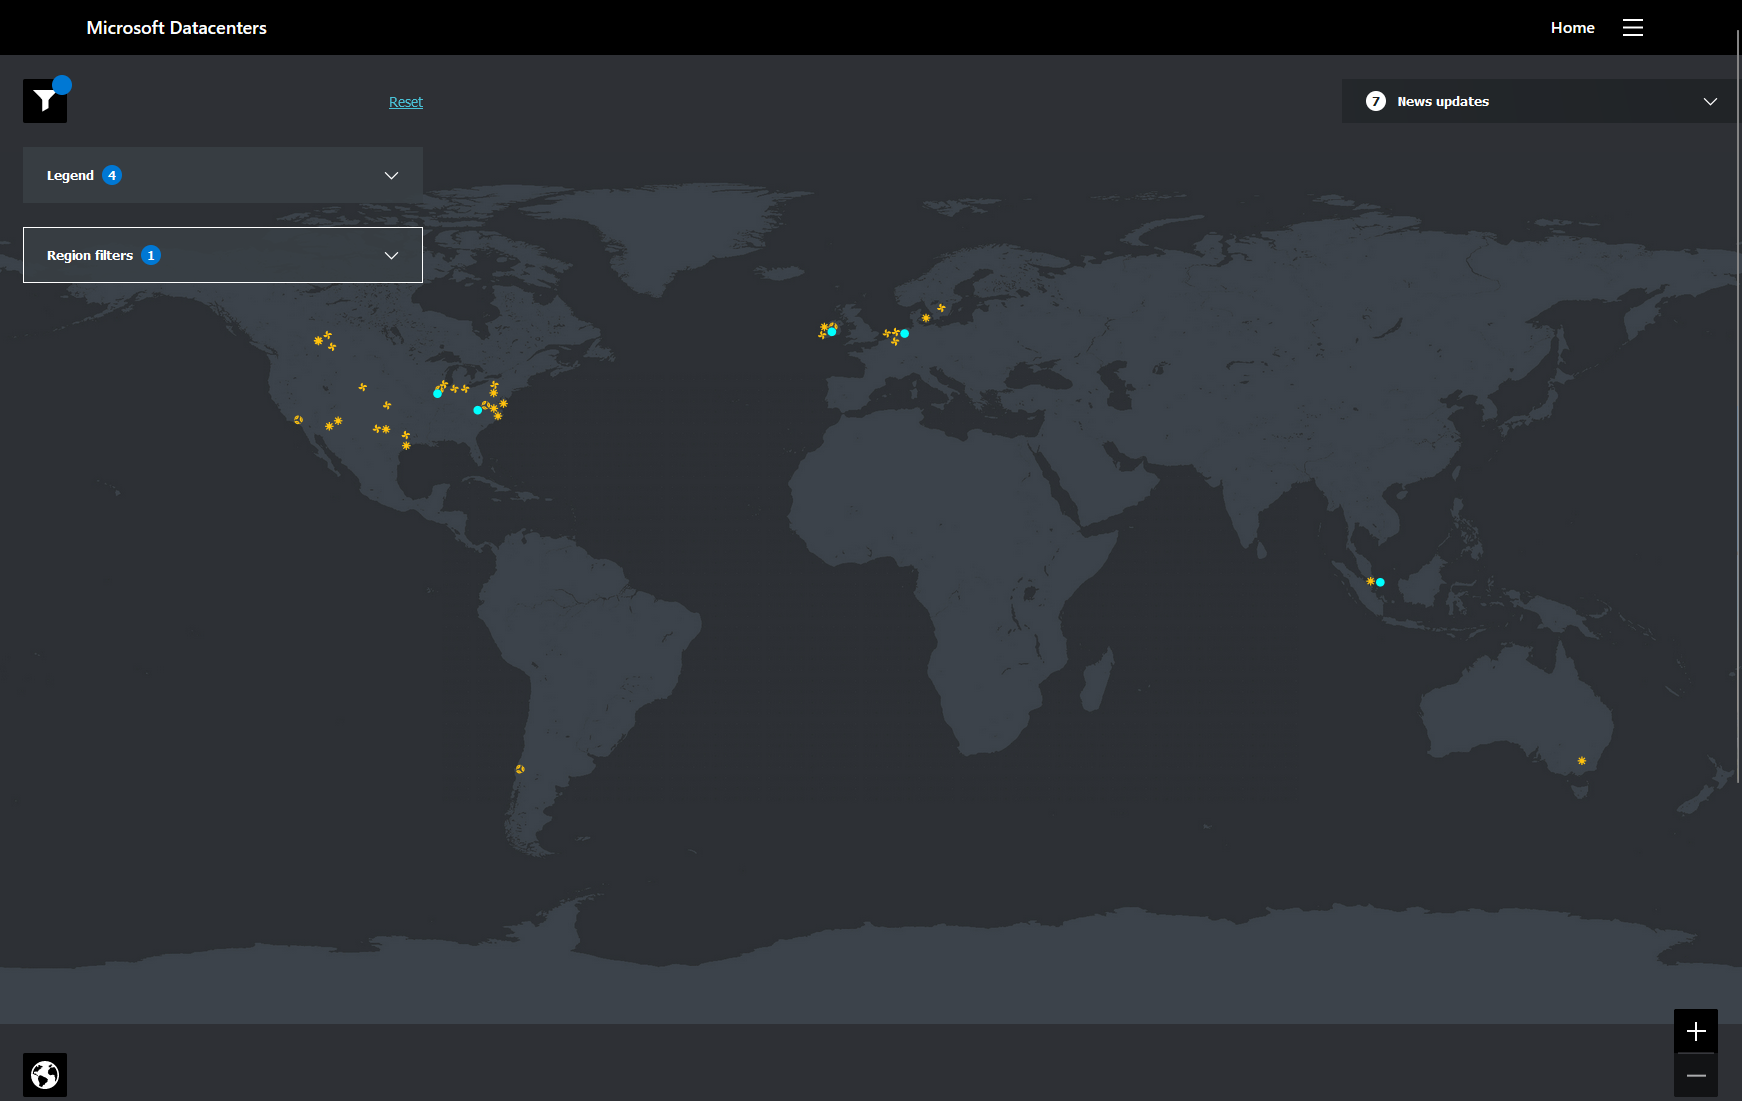 Image showing map of the world with yellow symbols across several continents showing sustainable projects Microsoft has implemented and blue dots near those yellow symbols that mark the Azure datacenter regions.